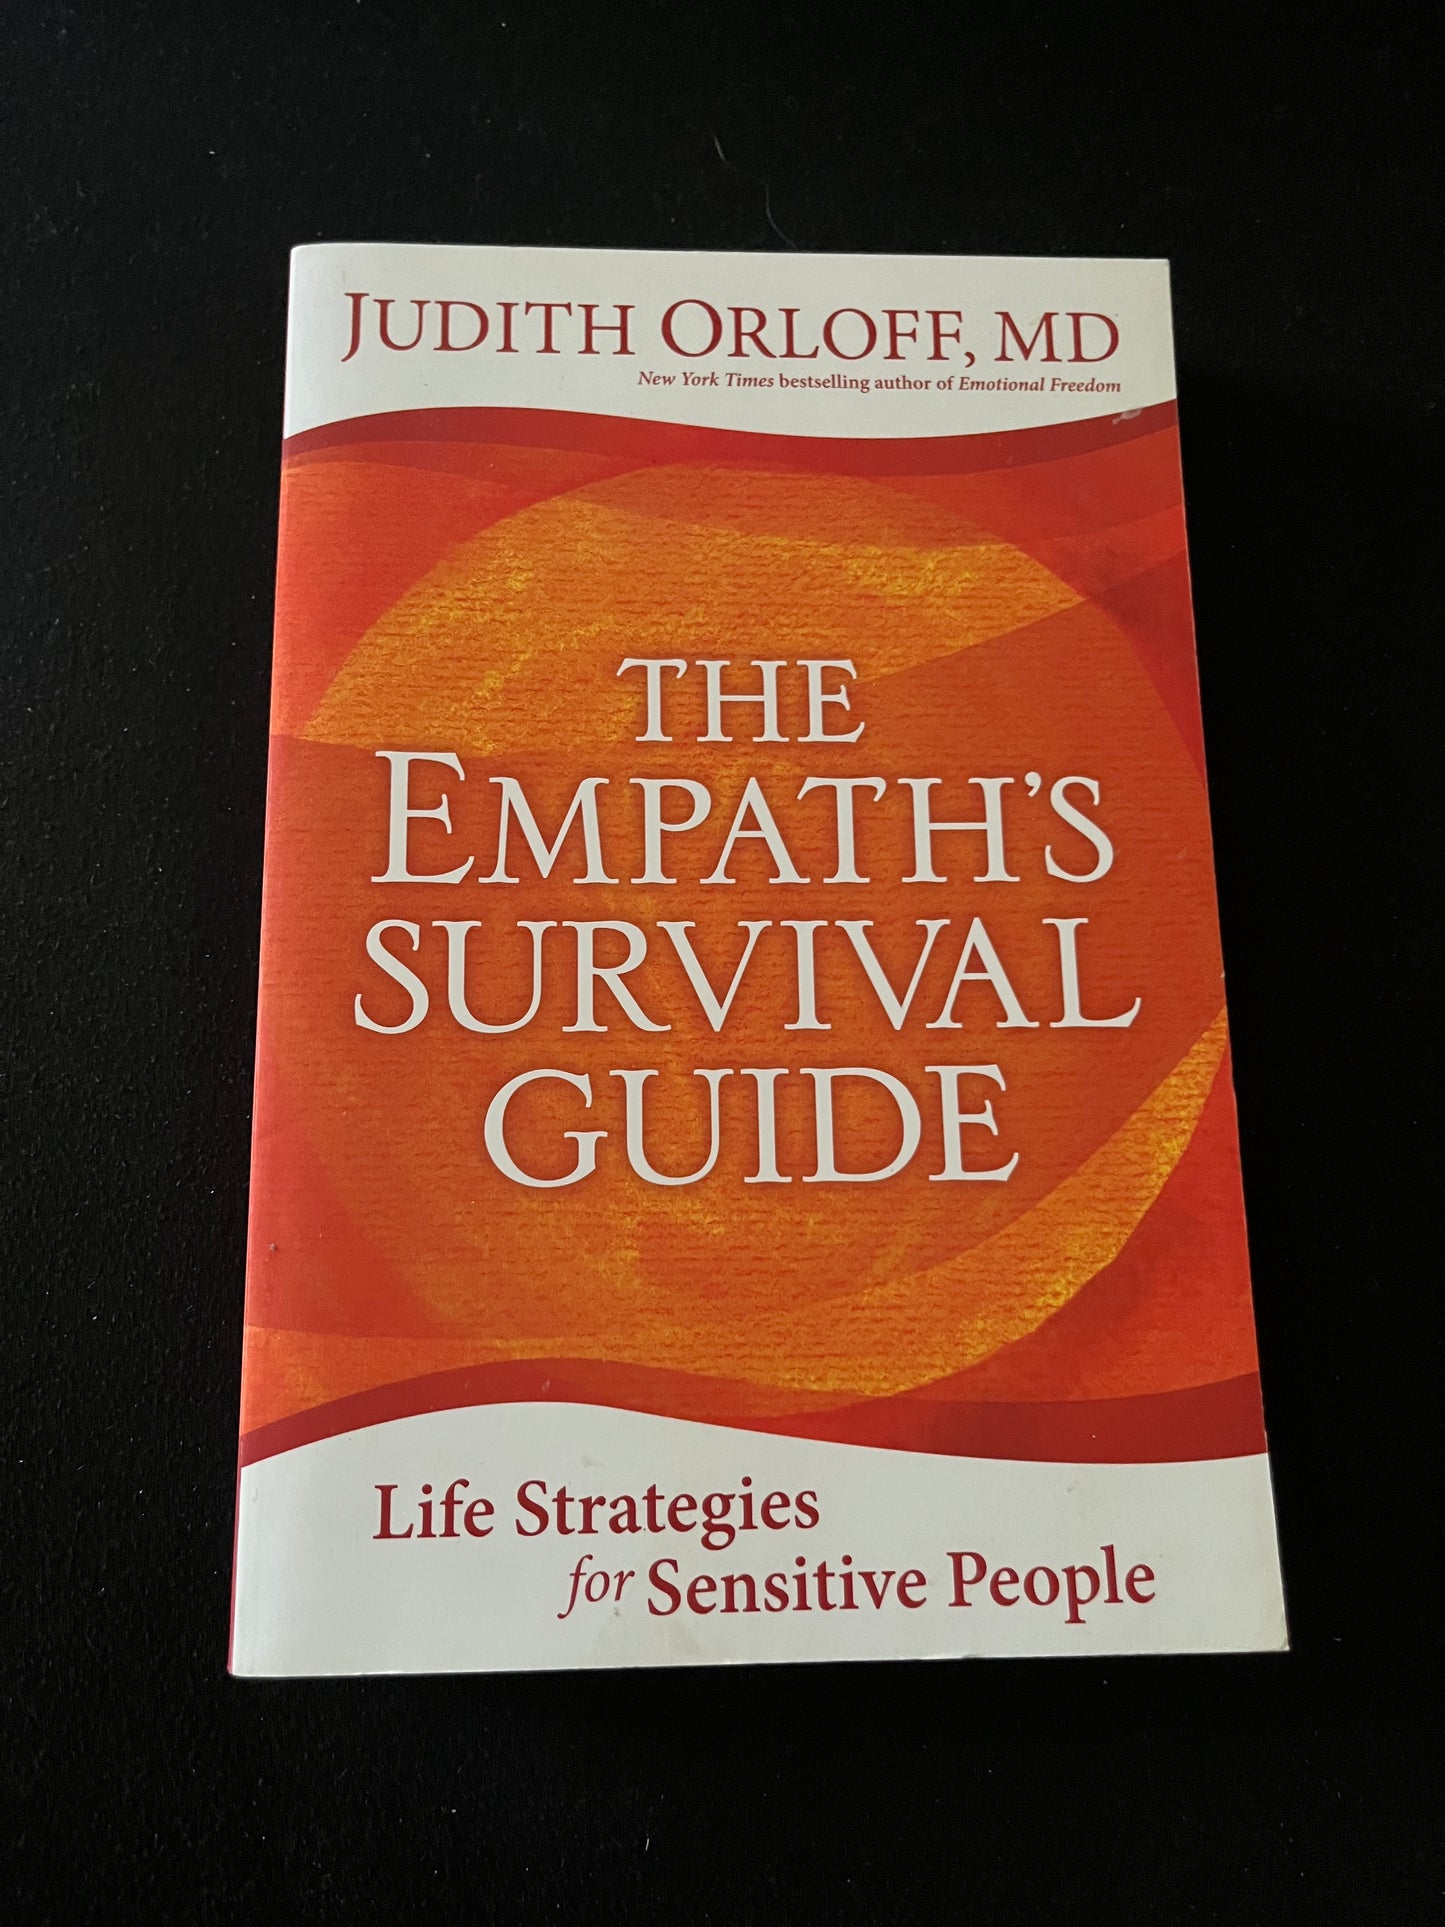 THE EMPATHS SURVIVAL GUIDE: LIFE STRATEGIES FOR SENSITIVE PEOPLE by Judith Orloff